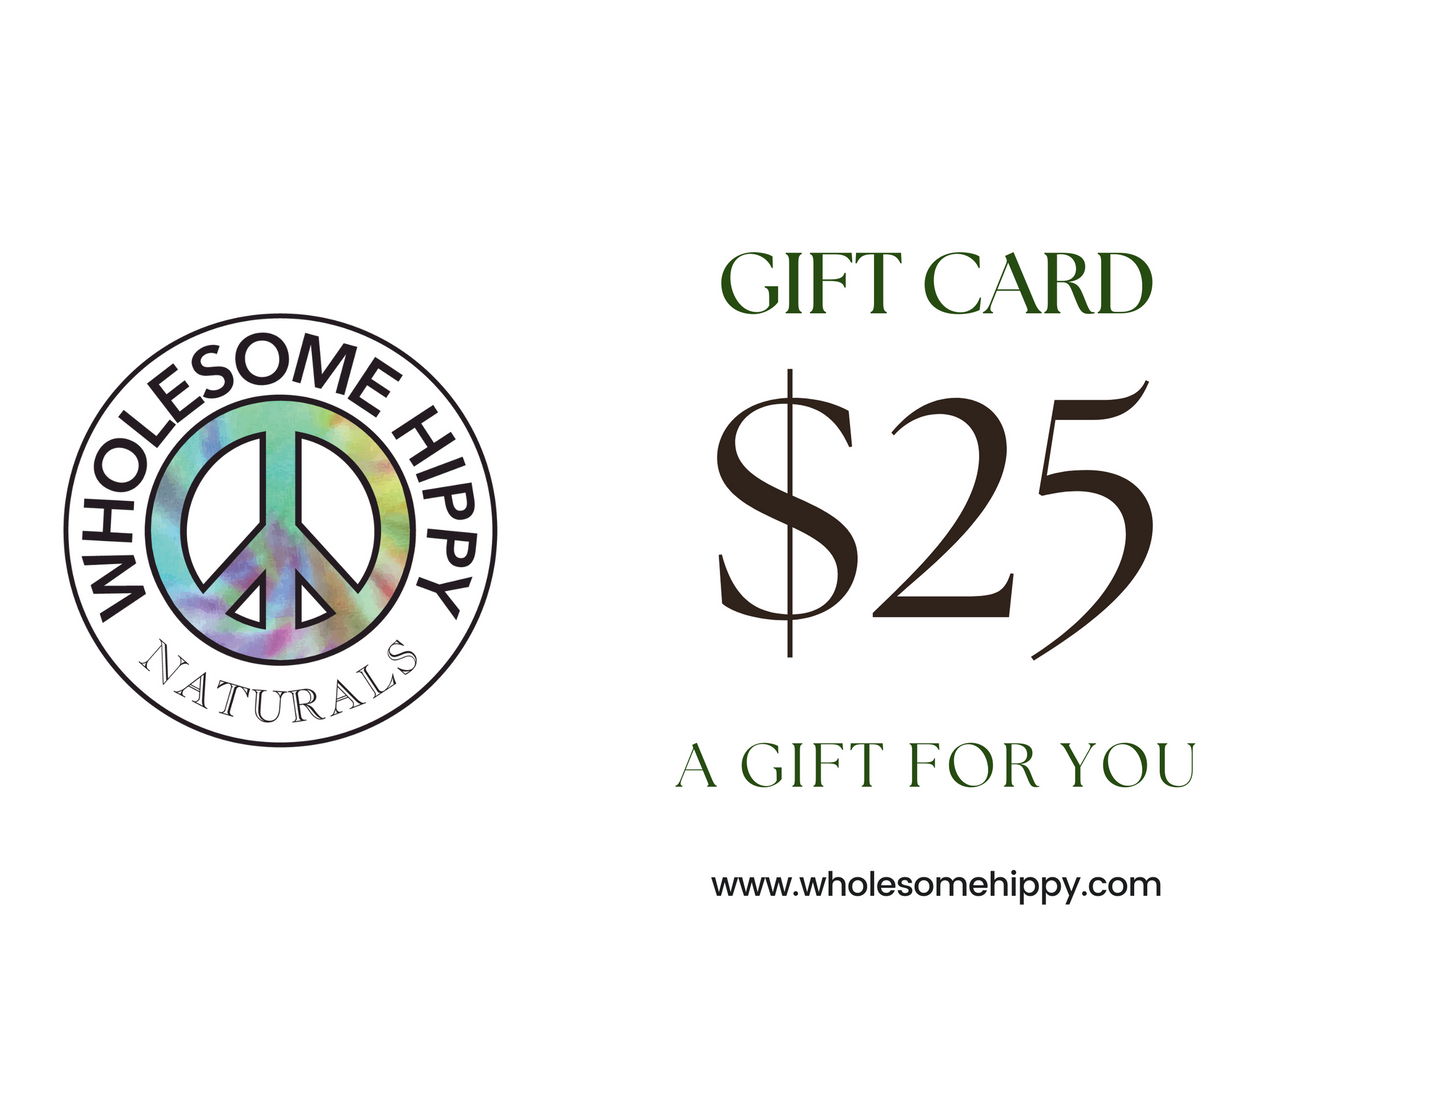 Wholesome Hippy Gift Card